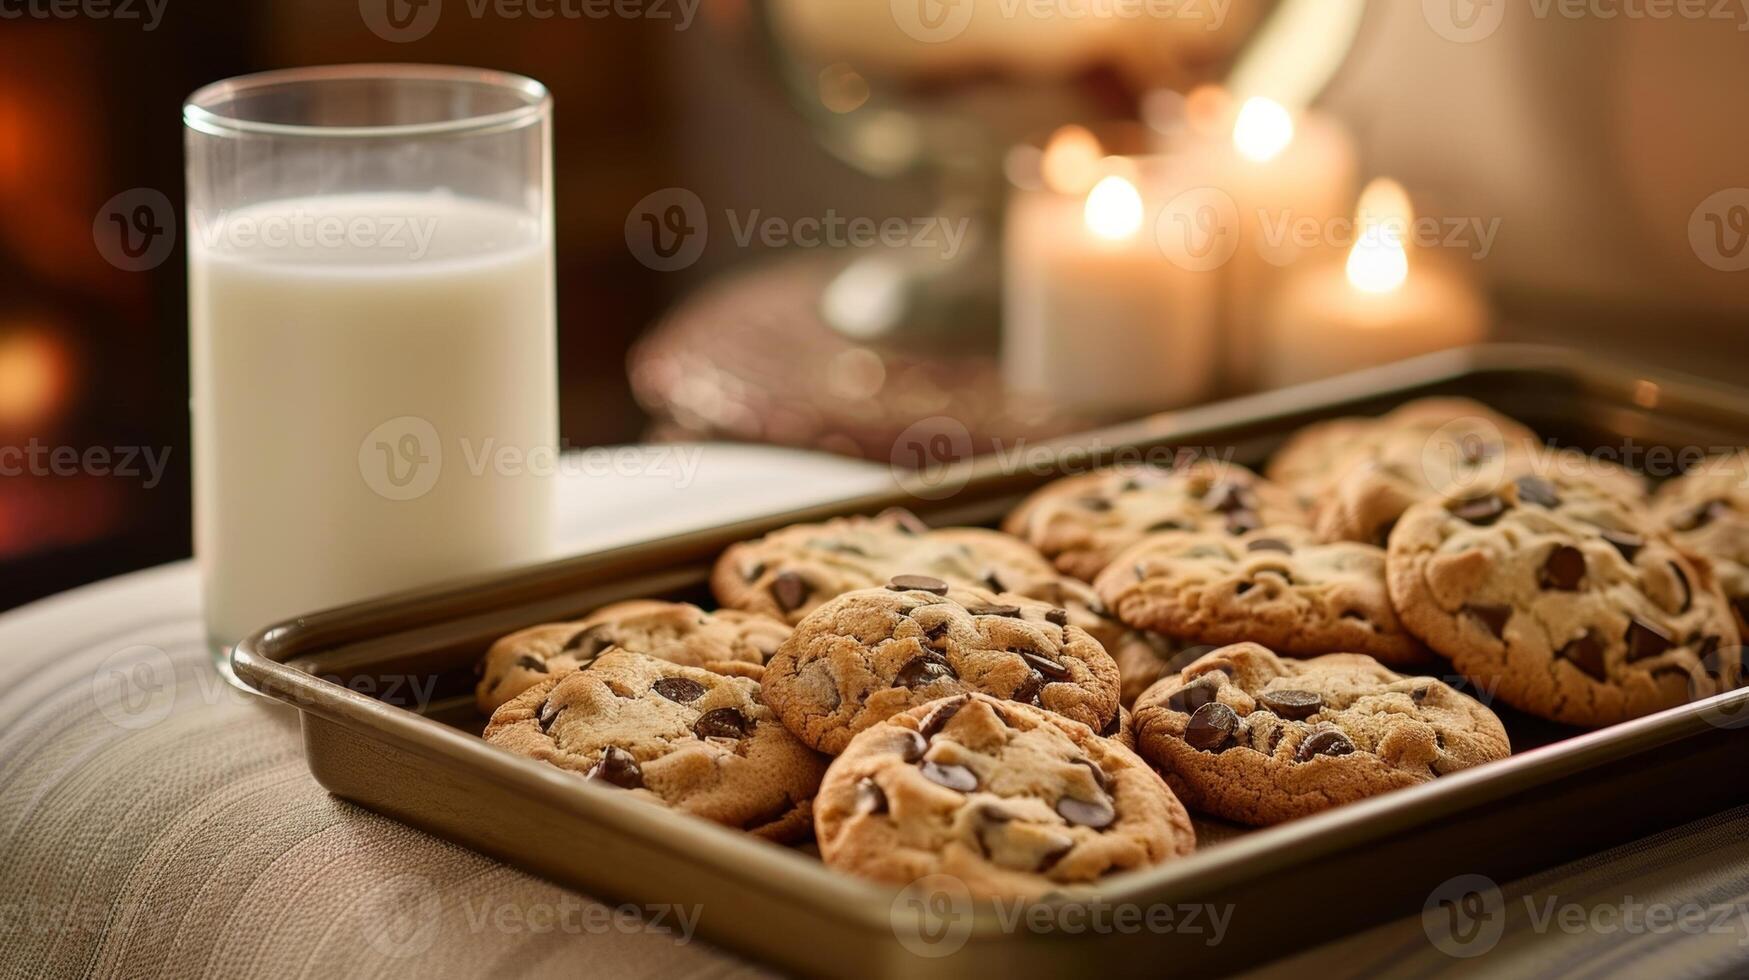 A tray of freshly baked cookies still warm from the oven ready to be enjoyed with a tall glass of milk while curled up on the couch photo